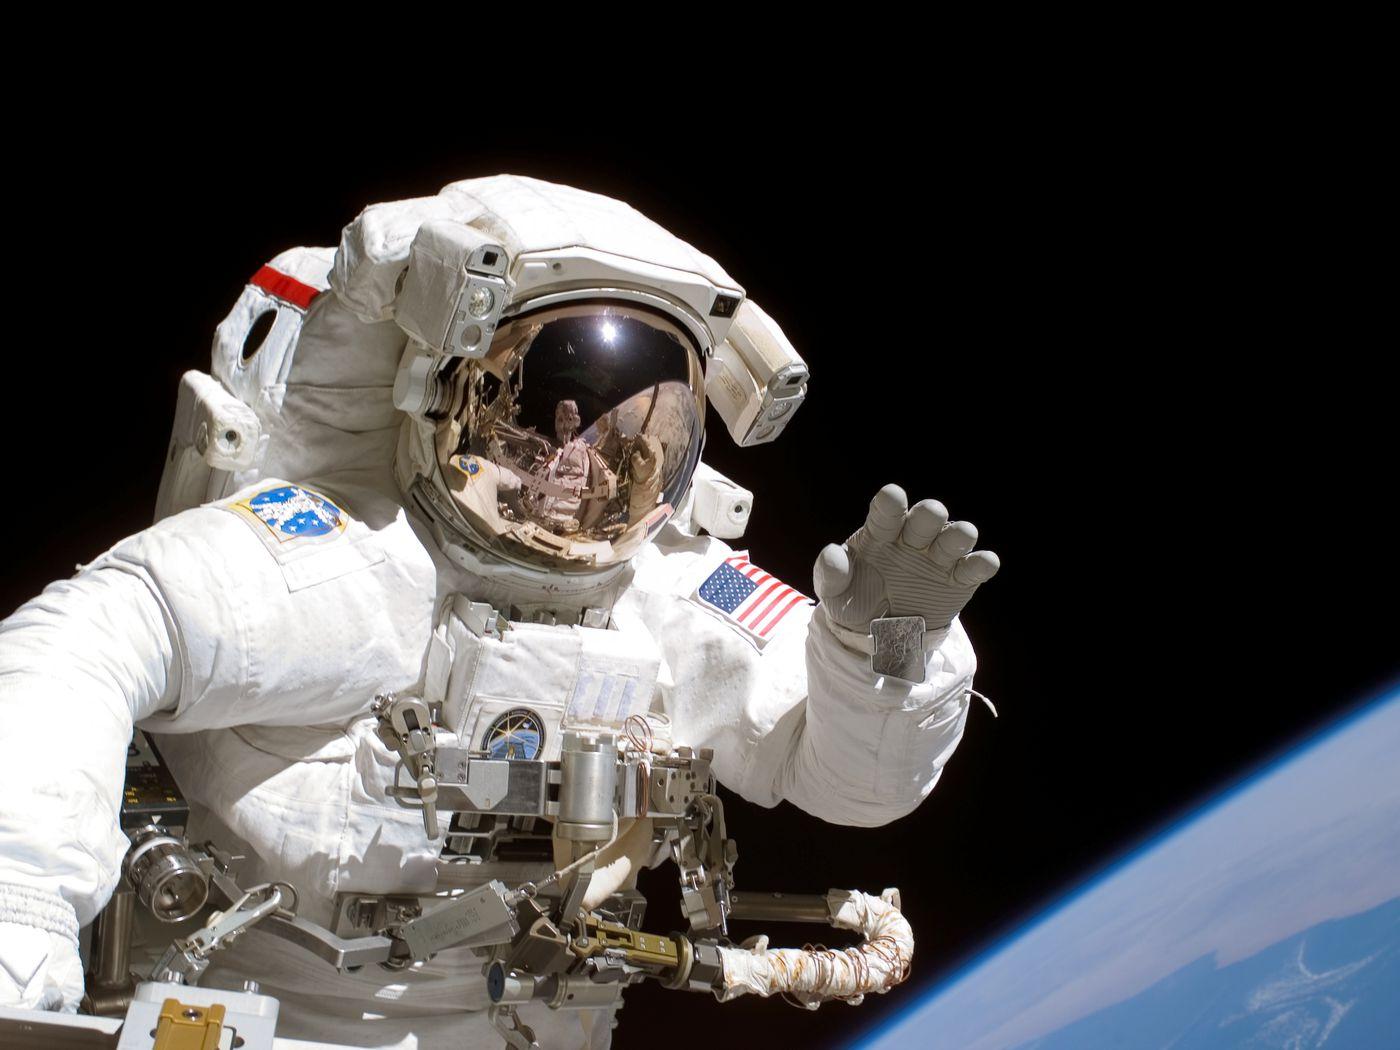 The odds you'll get picked to be an astronaut are pretty low